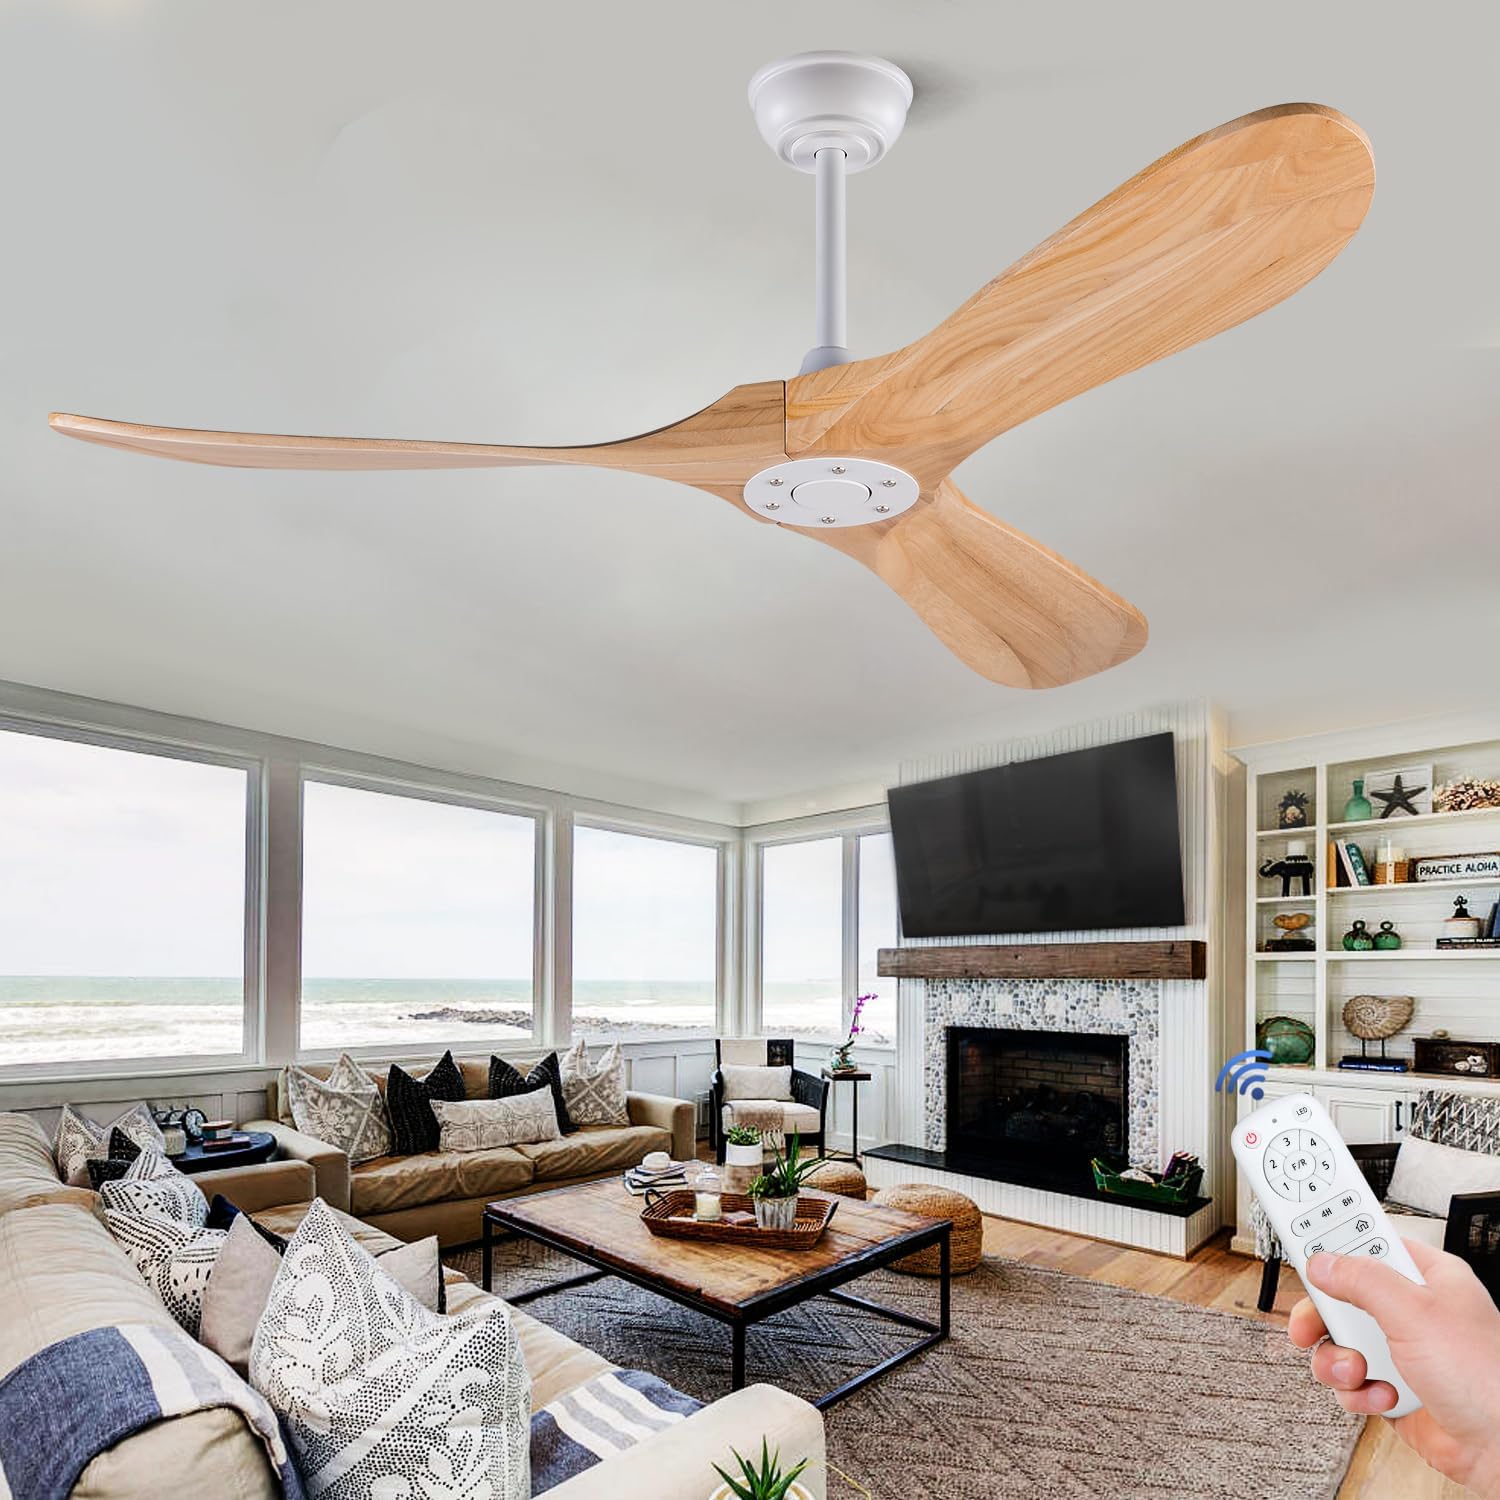 BOJUE 52 Wood Ceiling Fan Without Light Remote Control, Low Profile Ceiling Fan Indoor Outdoor with 3 blade for Patio Living Room, Bedroom, Office, Summer House, Etc (Raw Wood Blades)